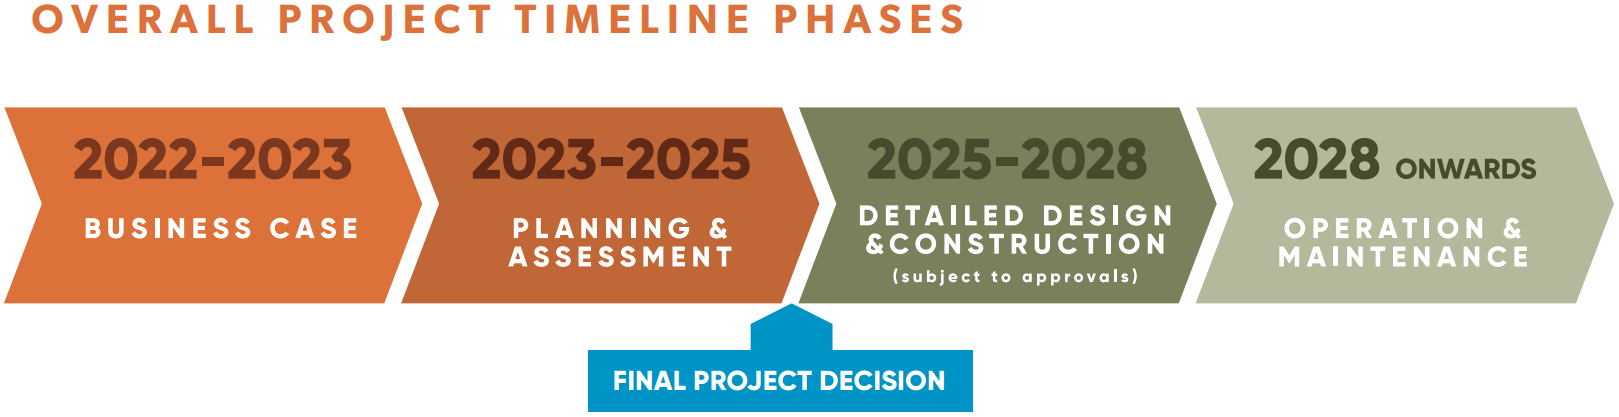 Project timeline from 2022 until 2028